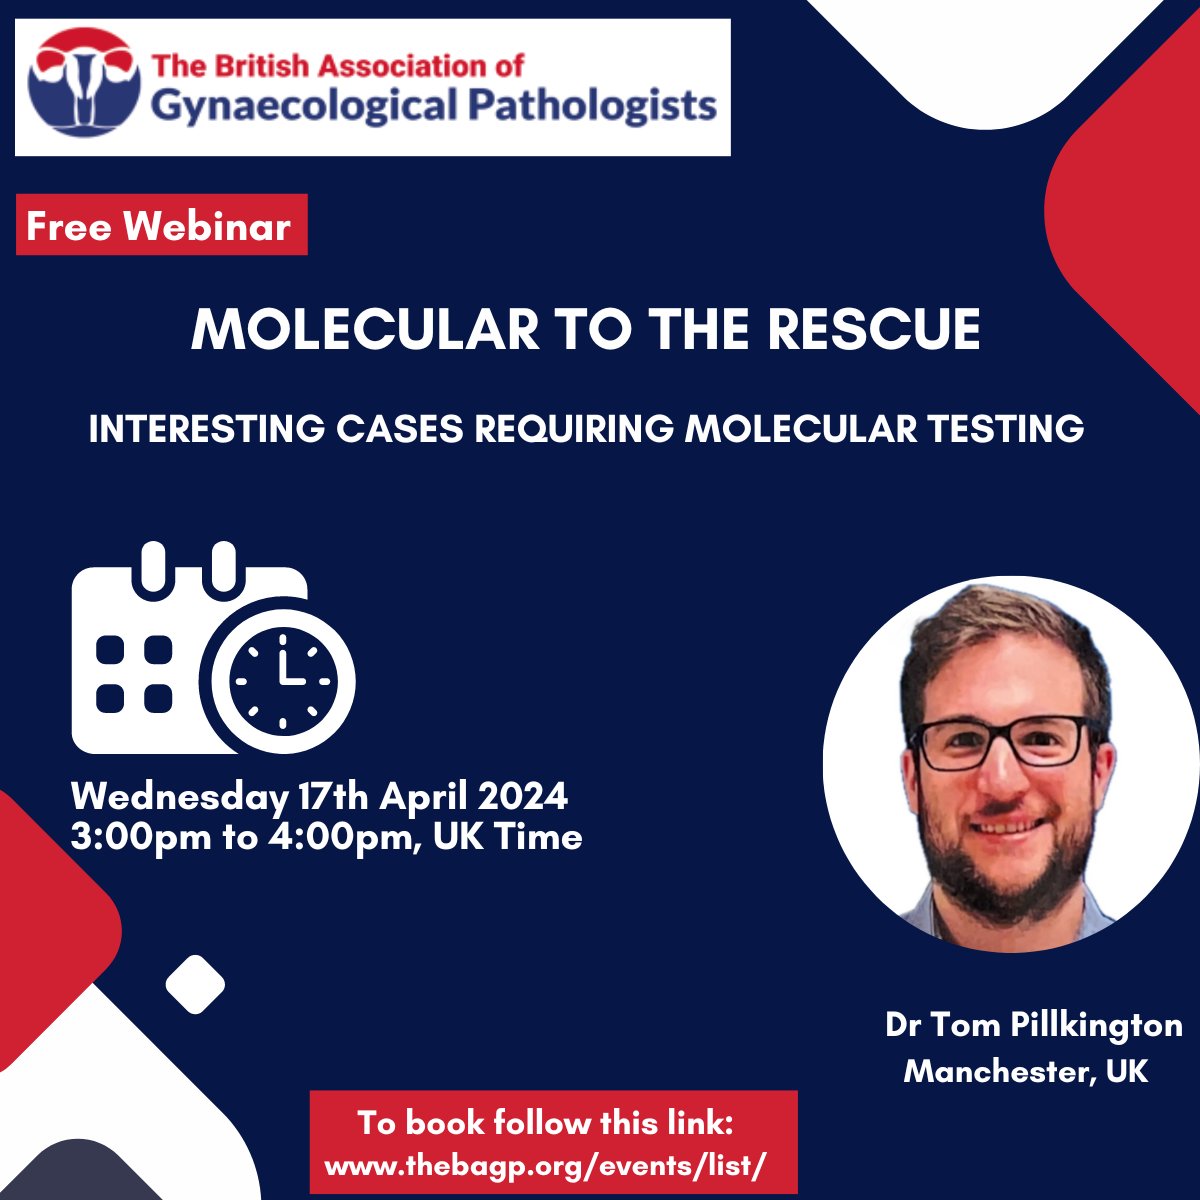 Please join @BAGPGynPath for our monthly free webinar on 17 April at 15:00 UK time. This month's topic is 'Molecular to the rescue - interesting cases requiring molecular testing' presented by Dr Pilkington. Register @ thebagp.org/events/list/ #PathTwitter #GynPath #GynaePath